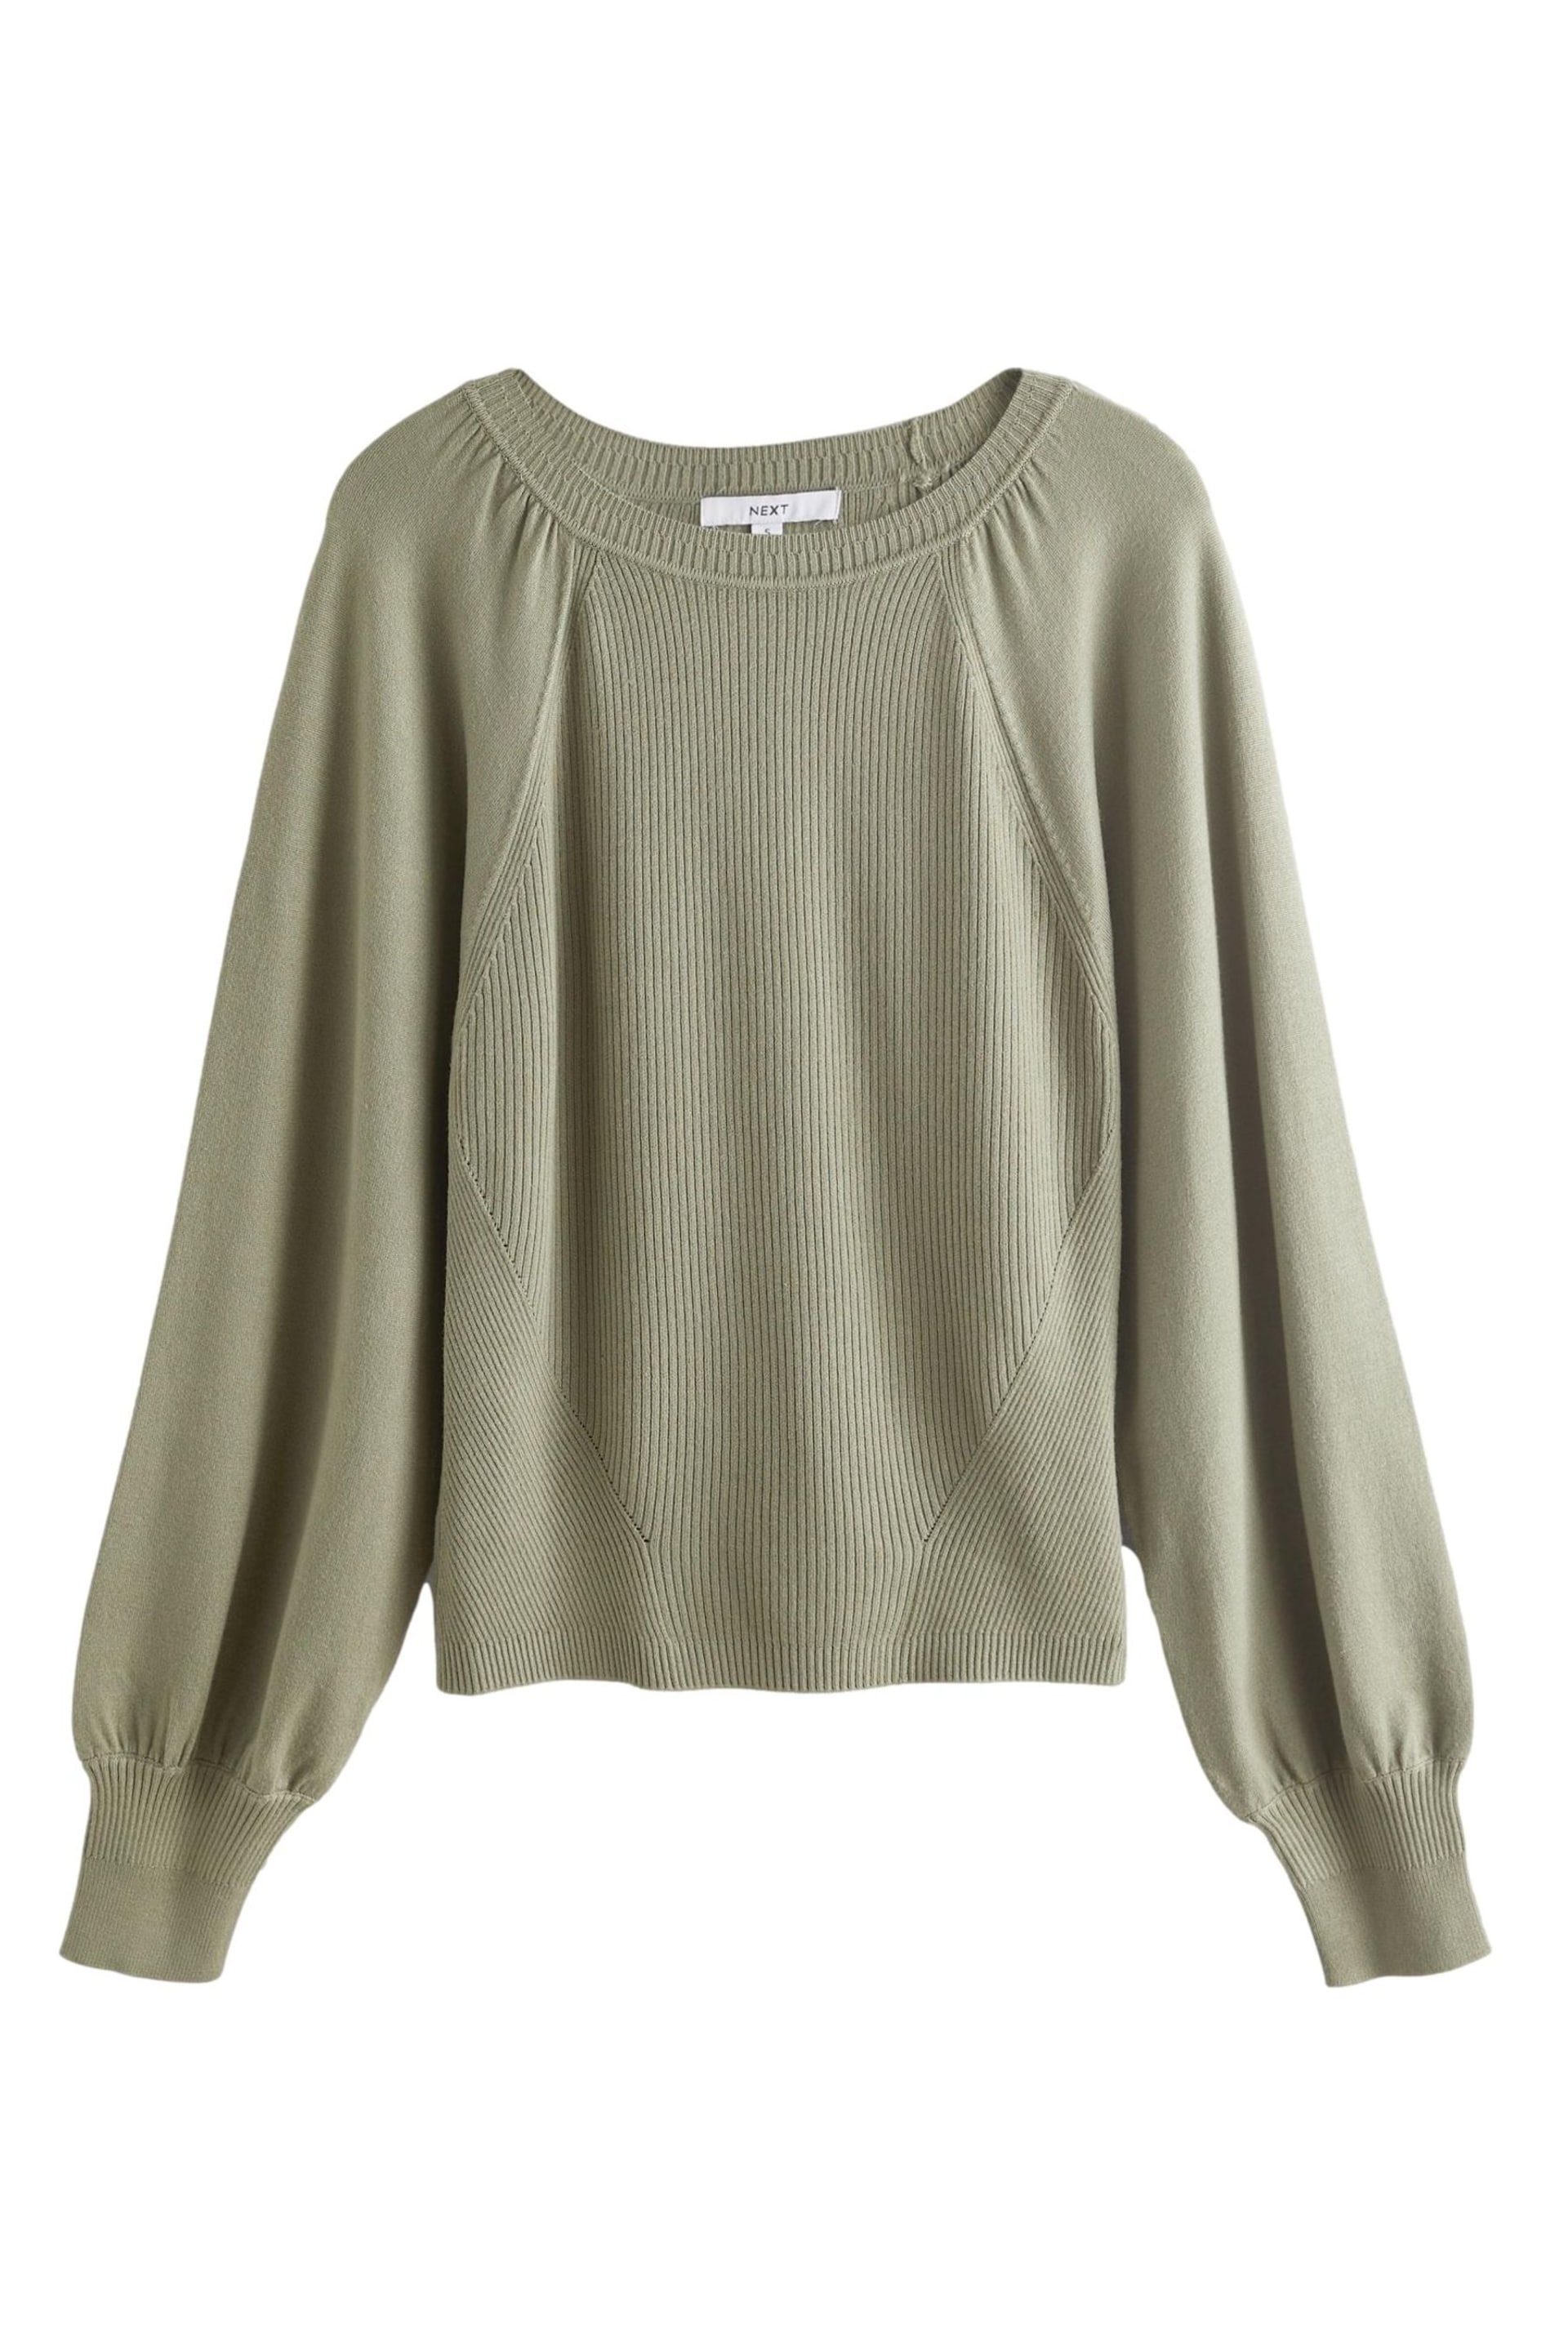 Sage Green Puff Sleeve Jumper - Image 5 of 6